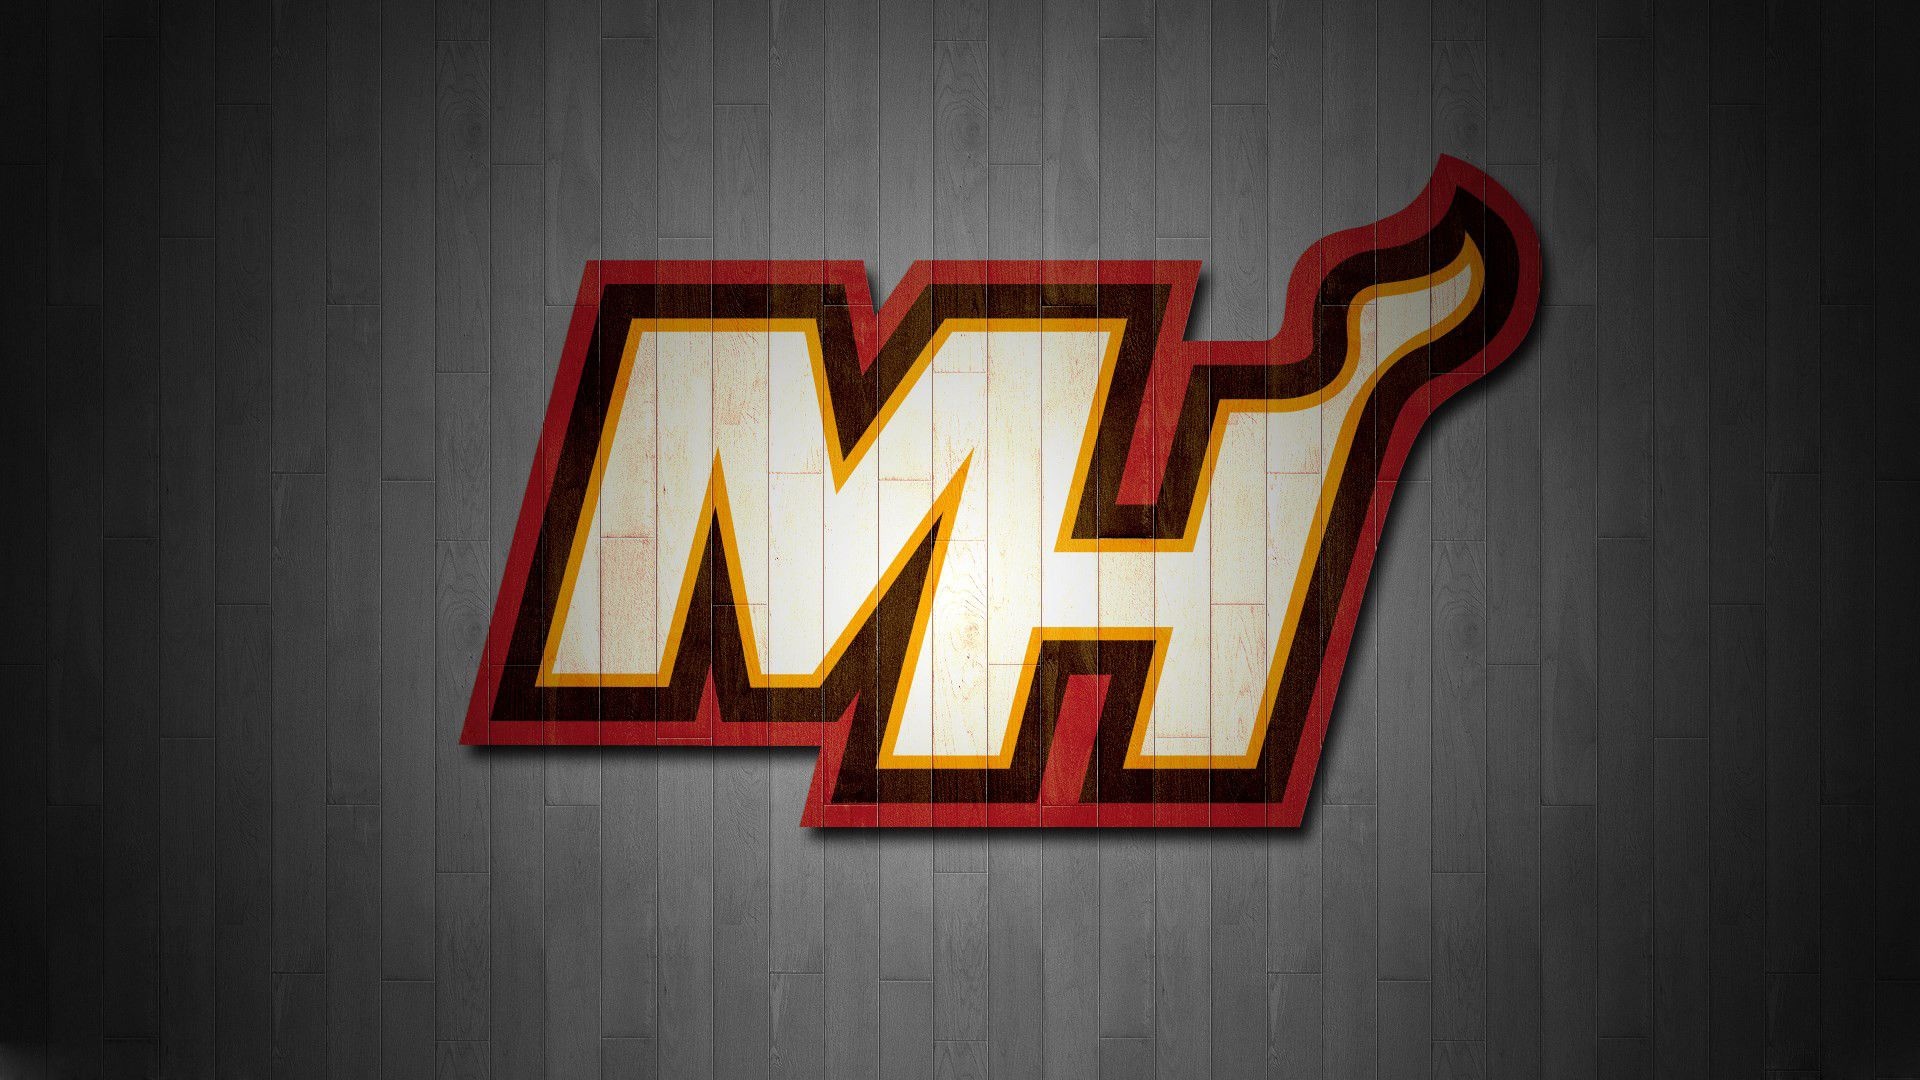 Miami Heat: The team was swept by the Chicago Bulls in the 1st round of the 2007 NBA playoffs. 1920x1080 Full HD Background.